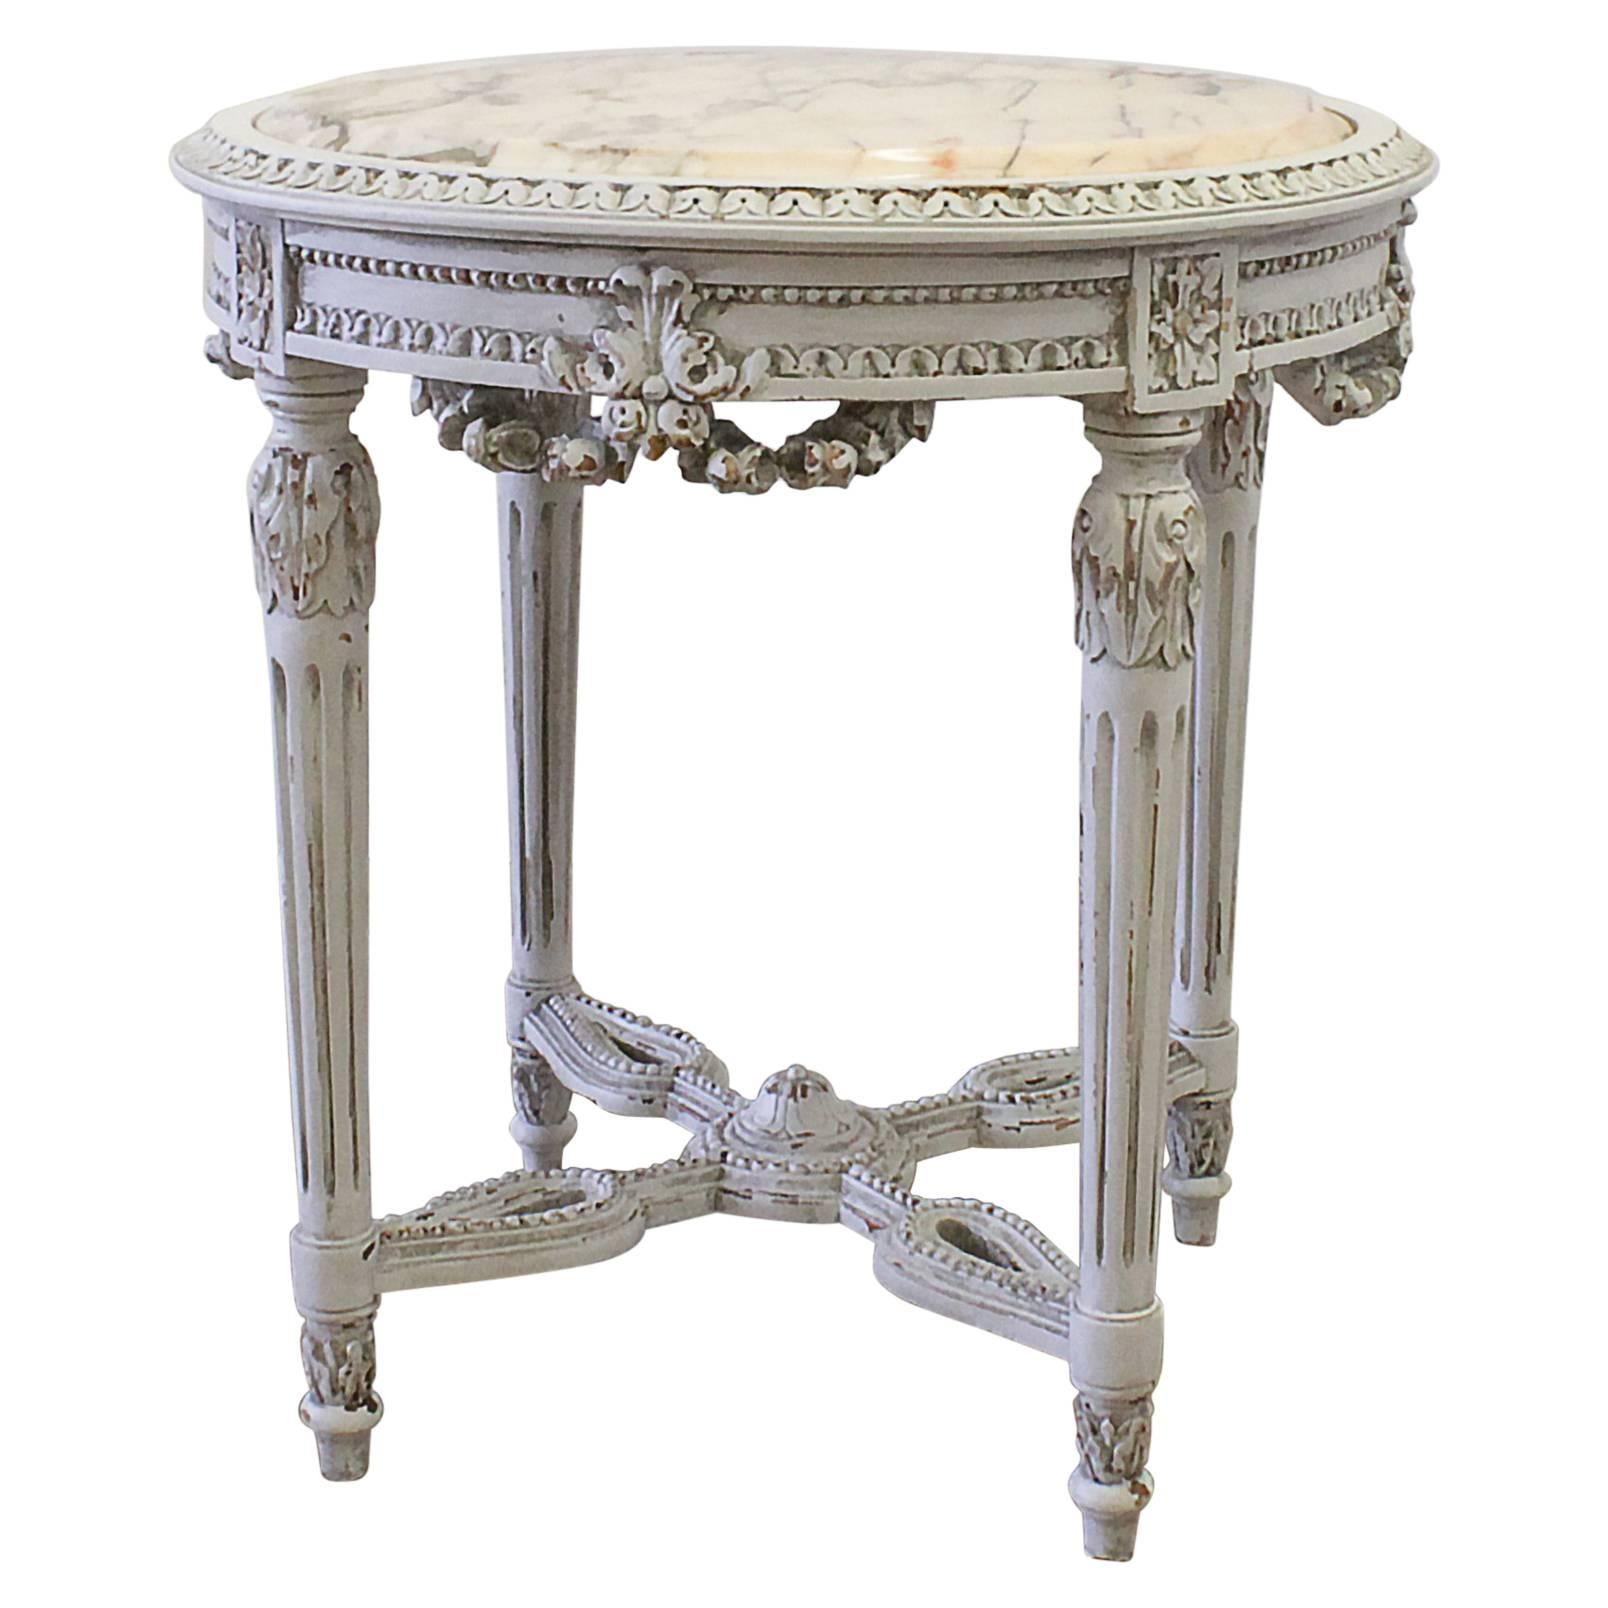 Antique French Louis XVI Style Painted Tea Side Table with Marble